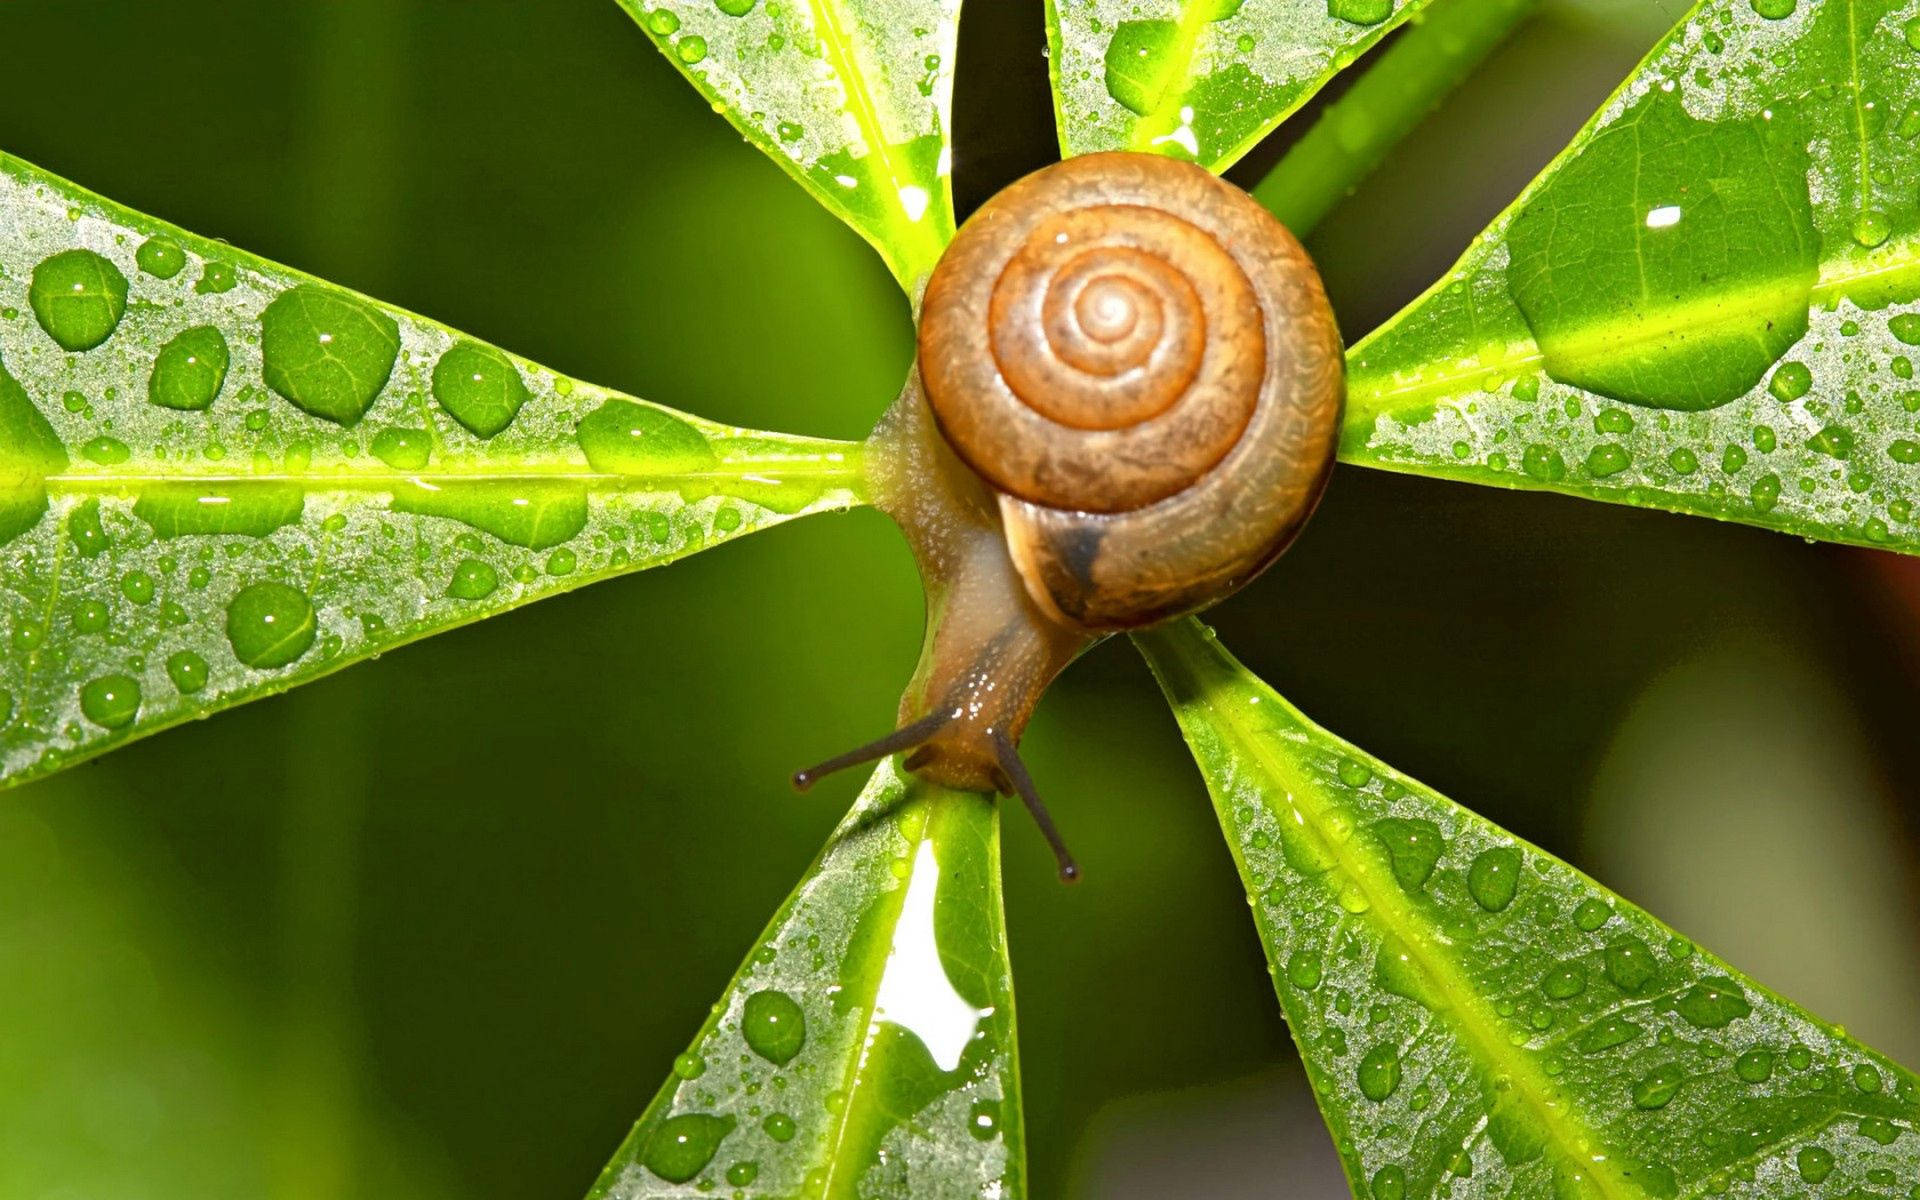 Stunning Image Of A Snail On A Leaf In The Dew-drop Morning Background